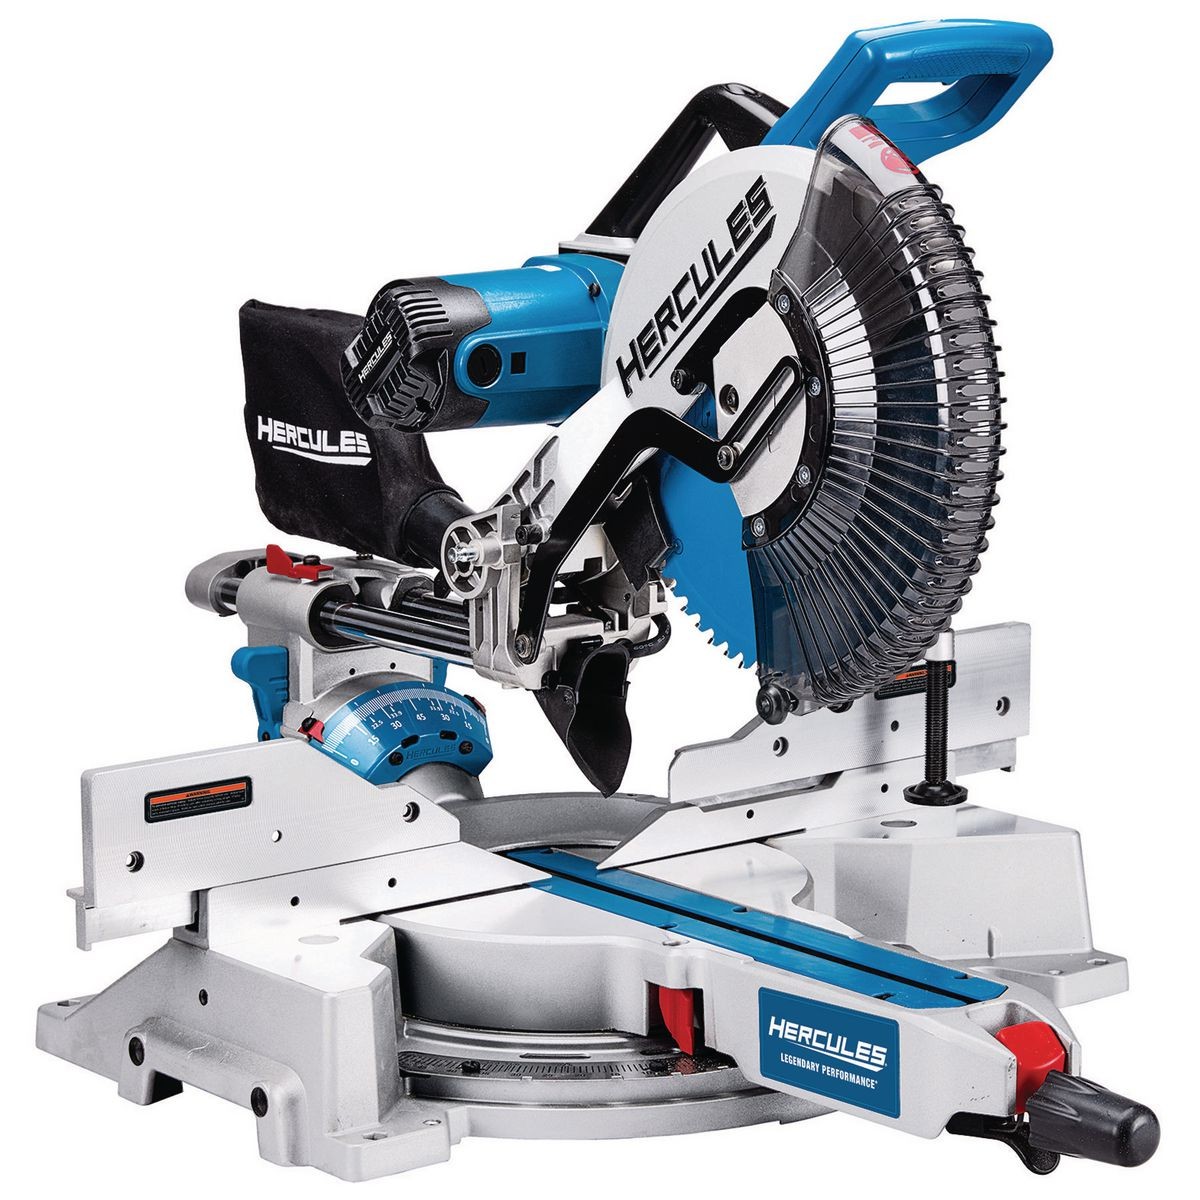 What is a compound miter saw